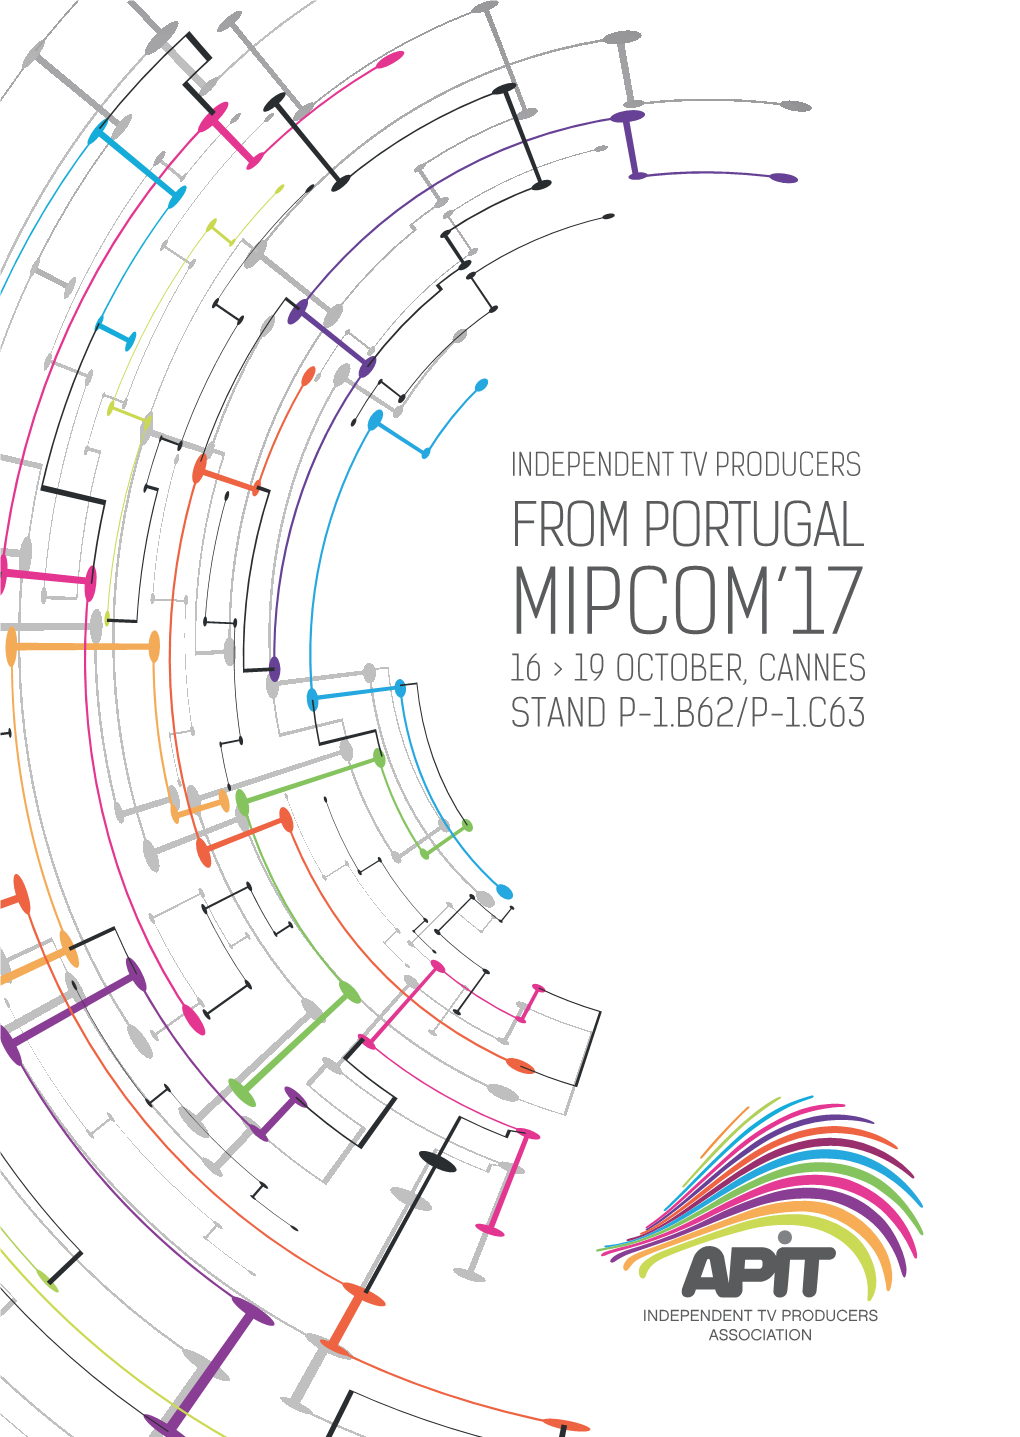 From Portugal Mipcom’17 16 > 19 October, Cannes Stand P-1.B62/P-1.C63 Independent Tv Producers from Portugal Mipcom’17 16 > 19 October, Cannes Stand P-1.B62/P-1.C63